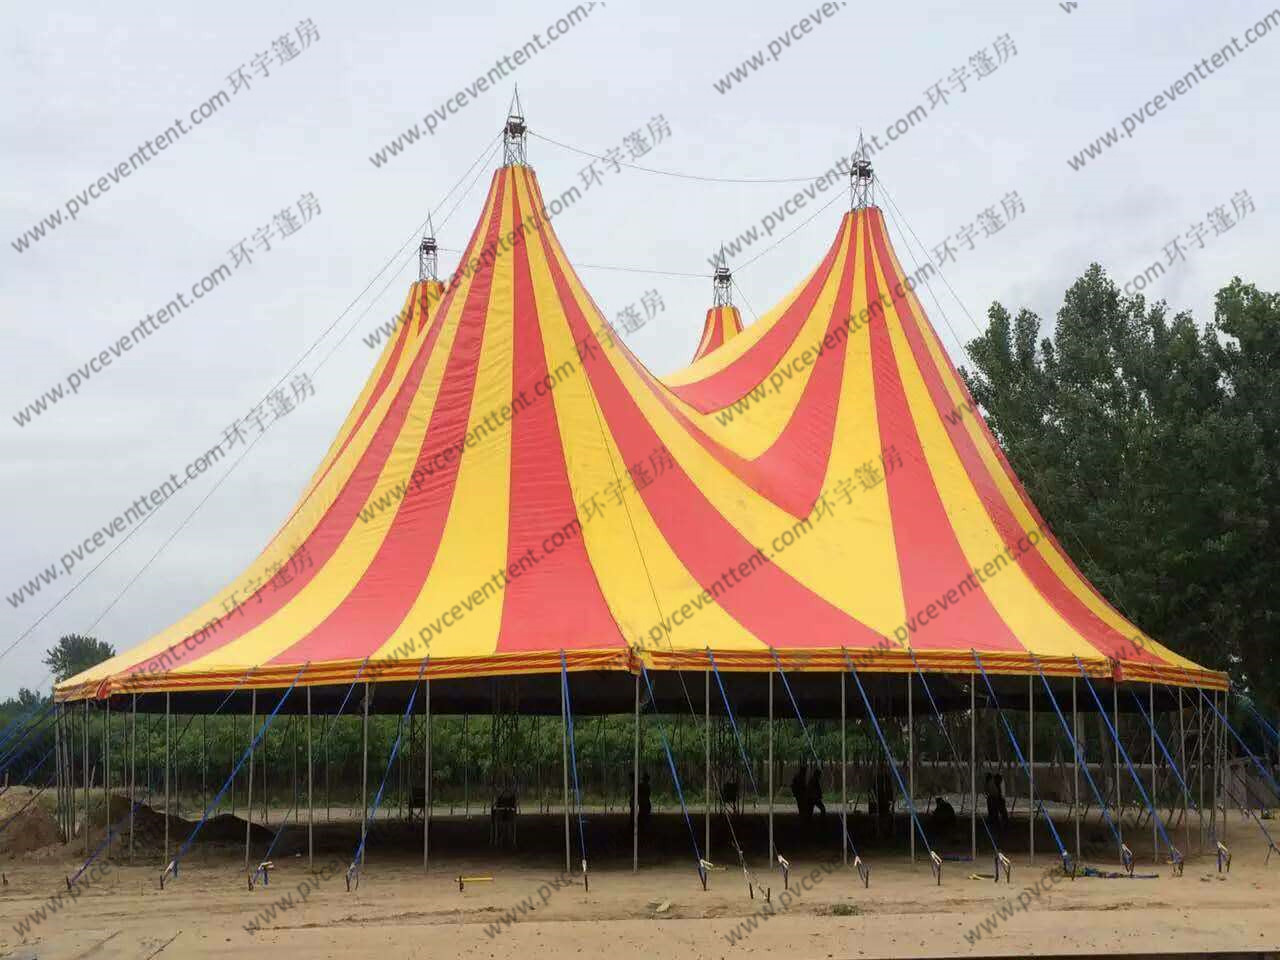 Yellow / Red Outdoor Event Tent PVC Roof Covering High Peak Used For Open - Air Party